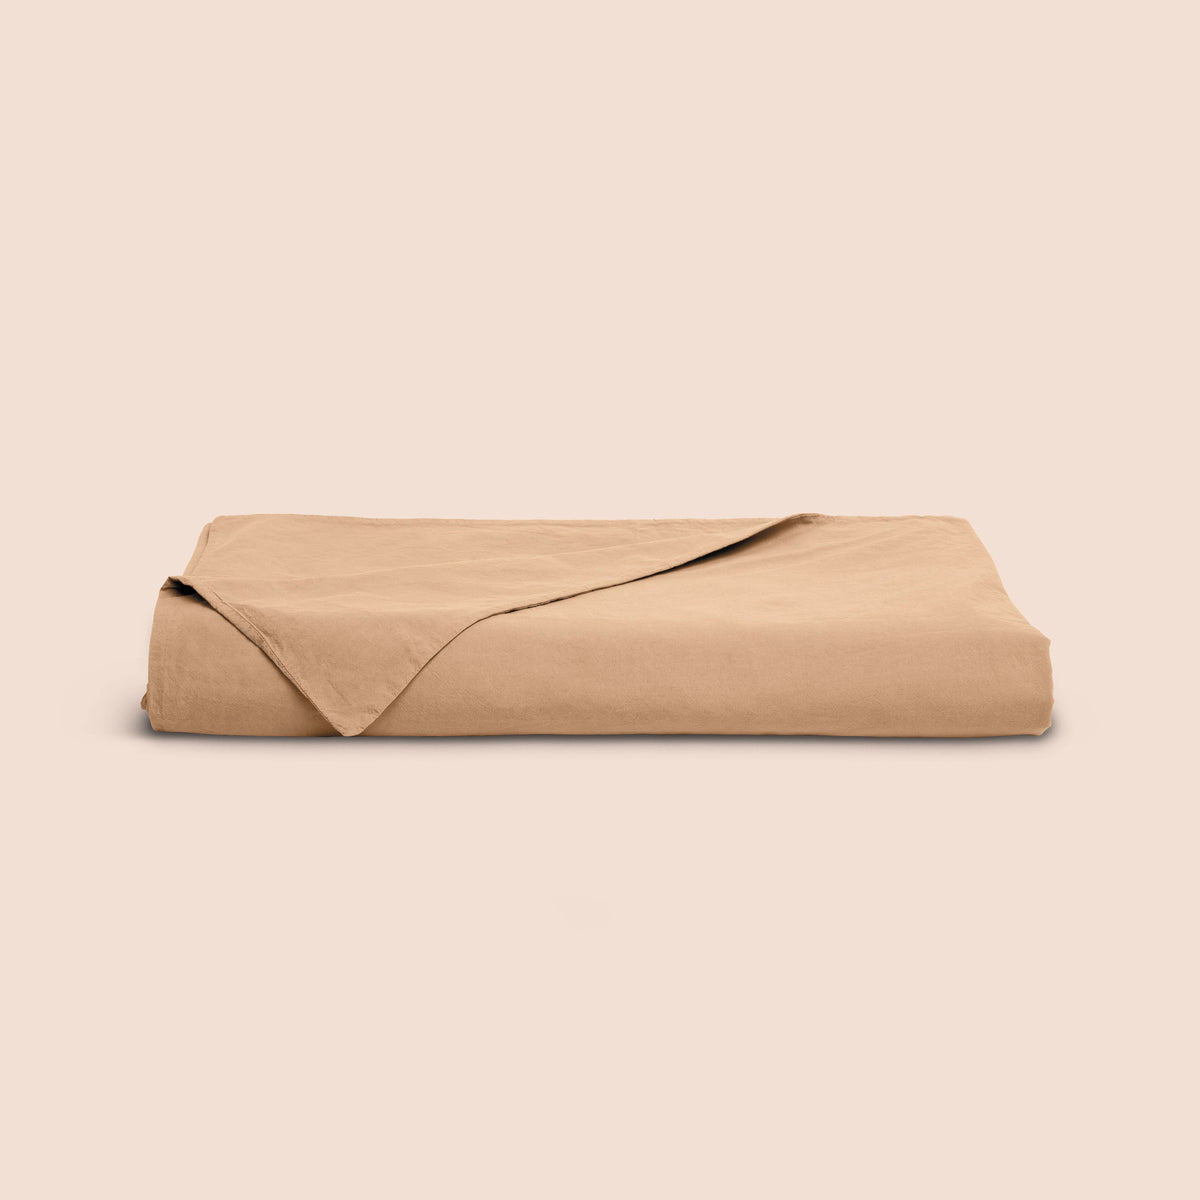 Image of an Ochre Garment Washed Percale Duvet Cover neatly folded with one corner draped towards the front on a light pink background